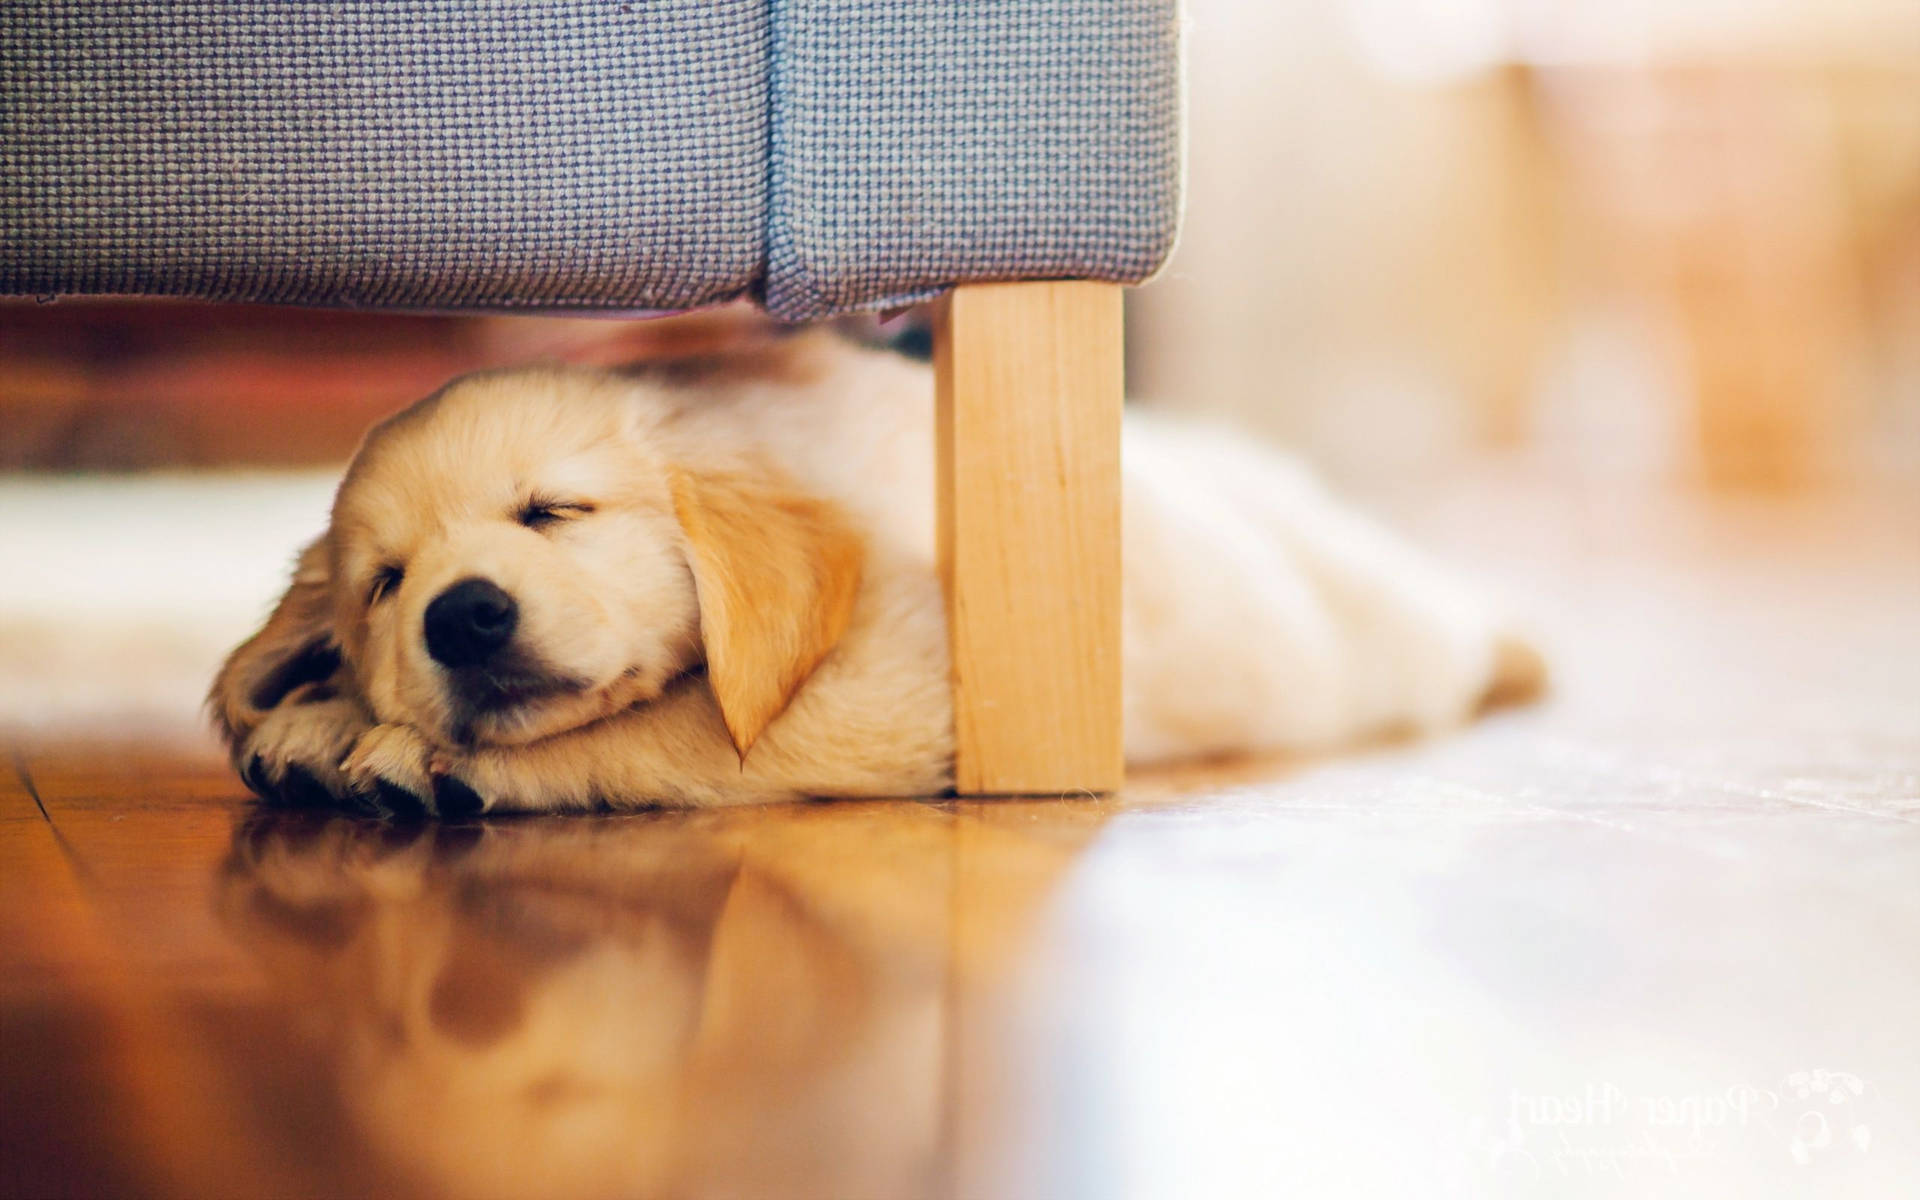 Sleeping Baby Retriever Dog Under The Couch Wallpaper